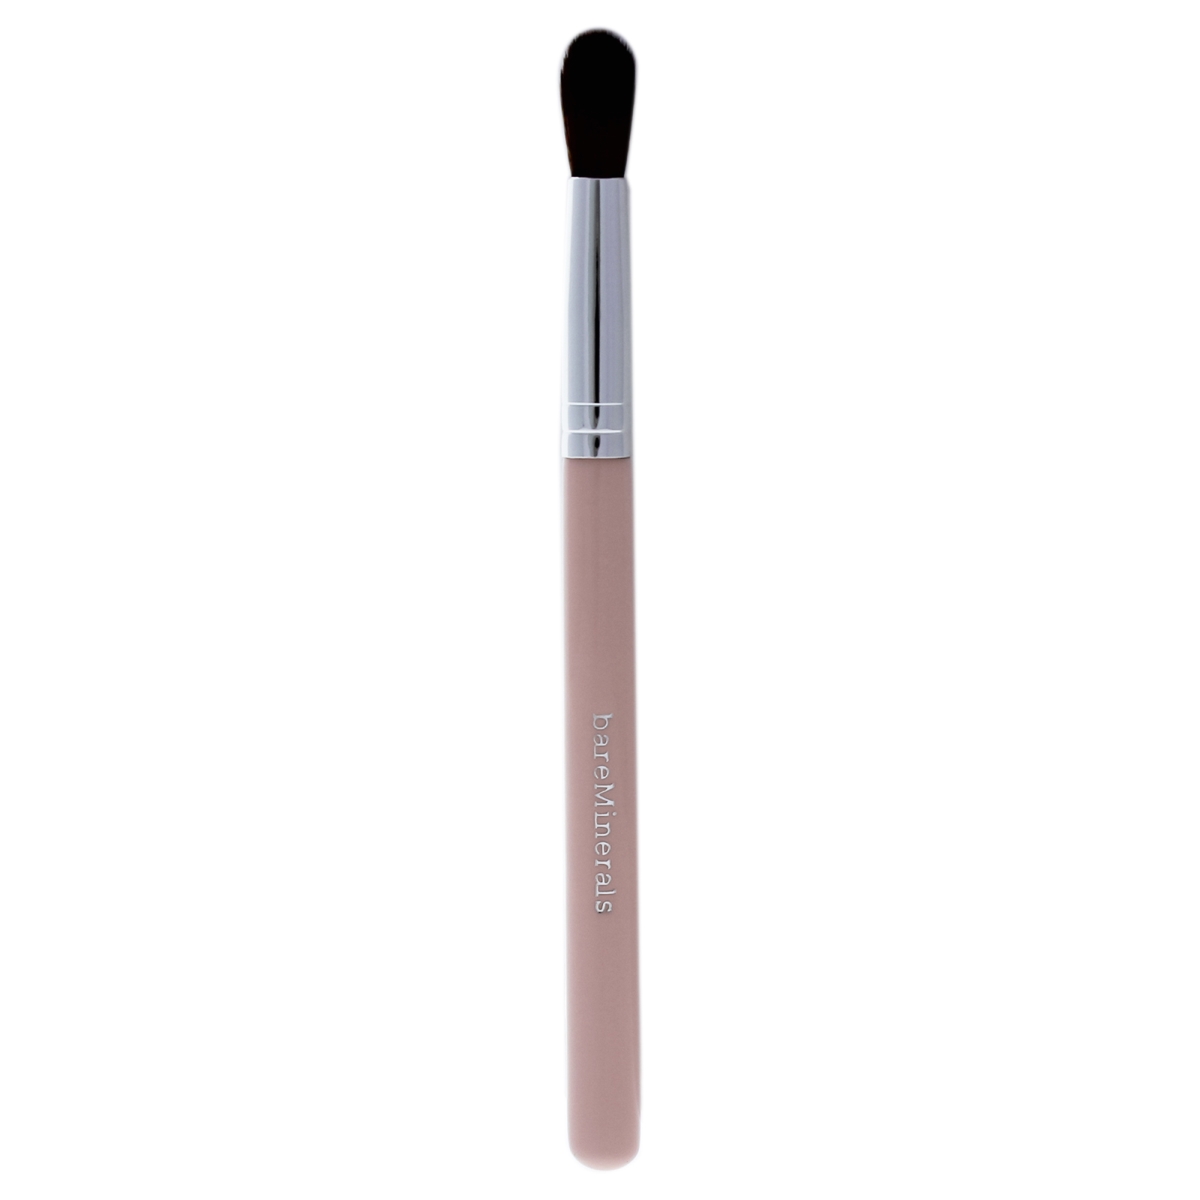 Picture of BareMinerals I0086315 Tapered Crease Defining Brush for Women